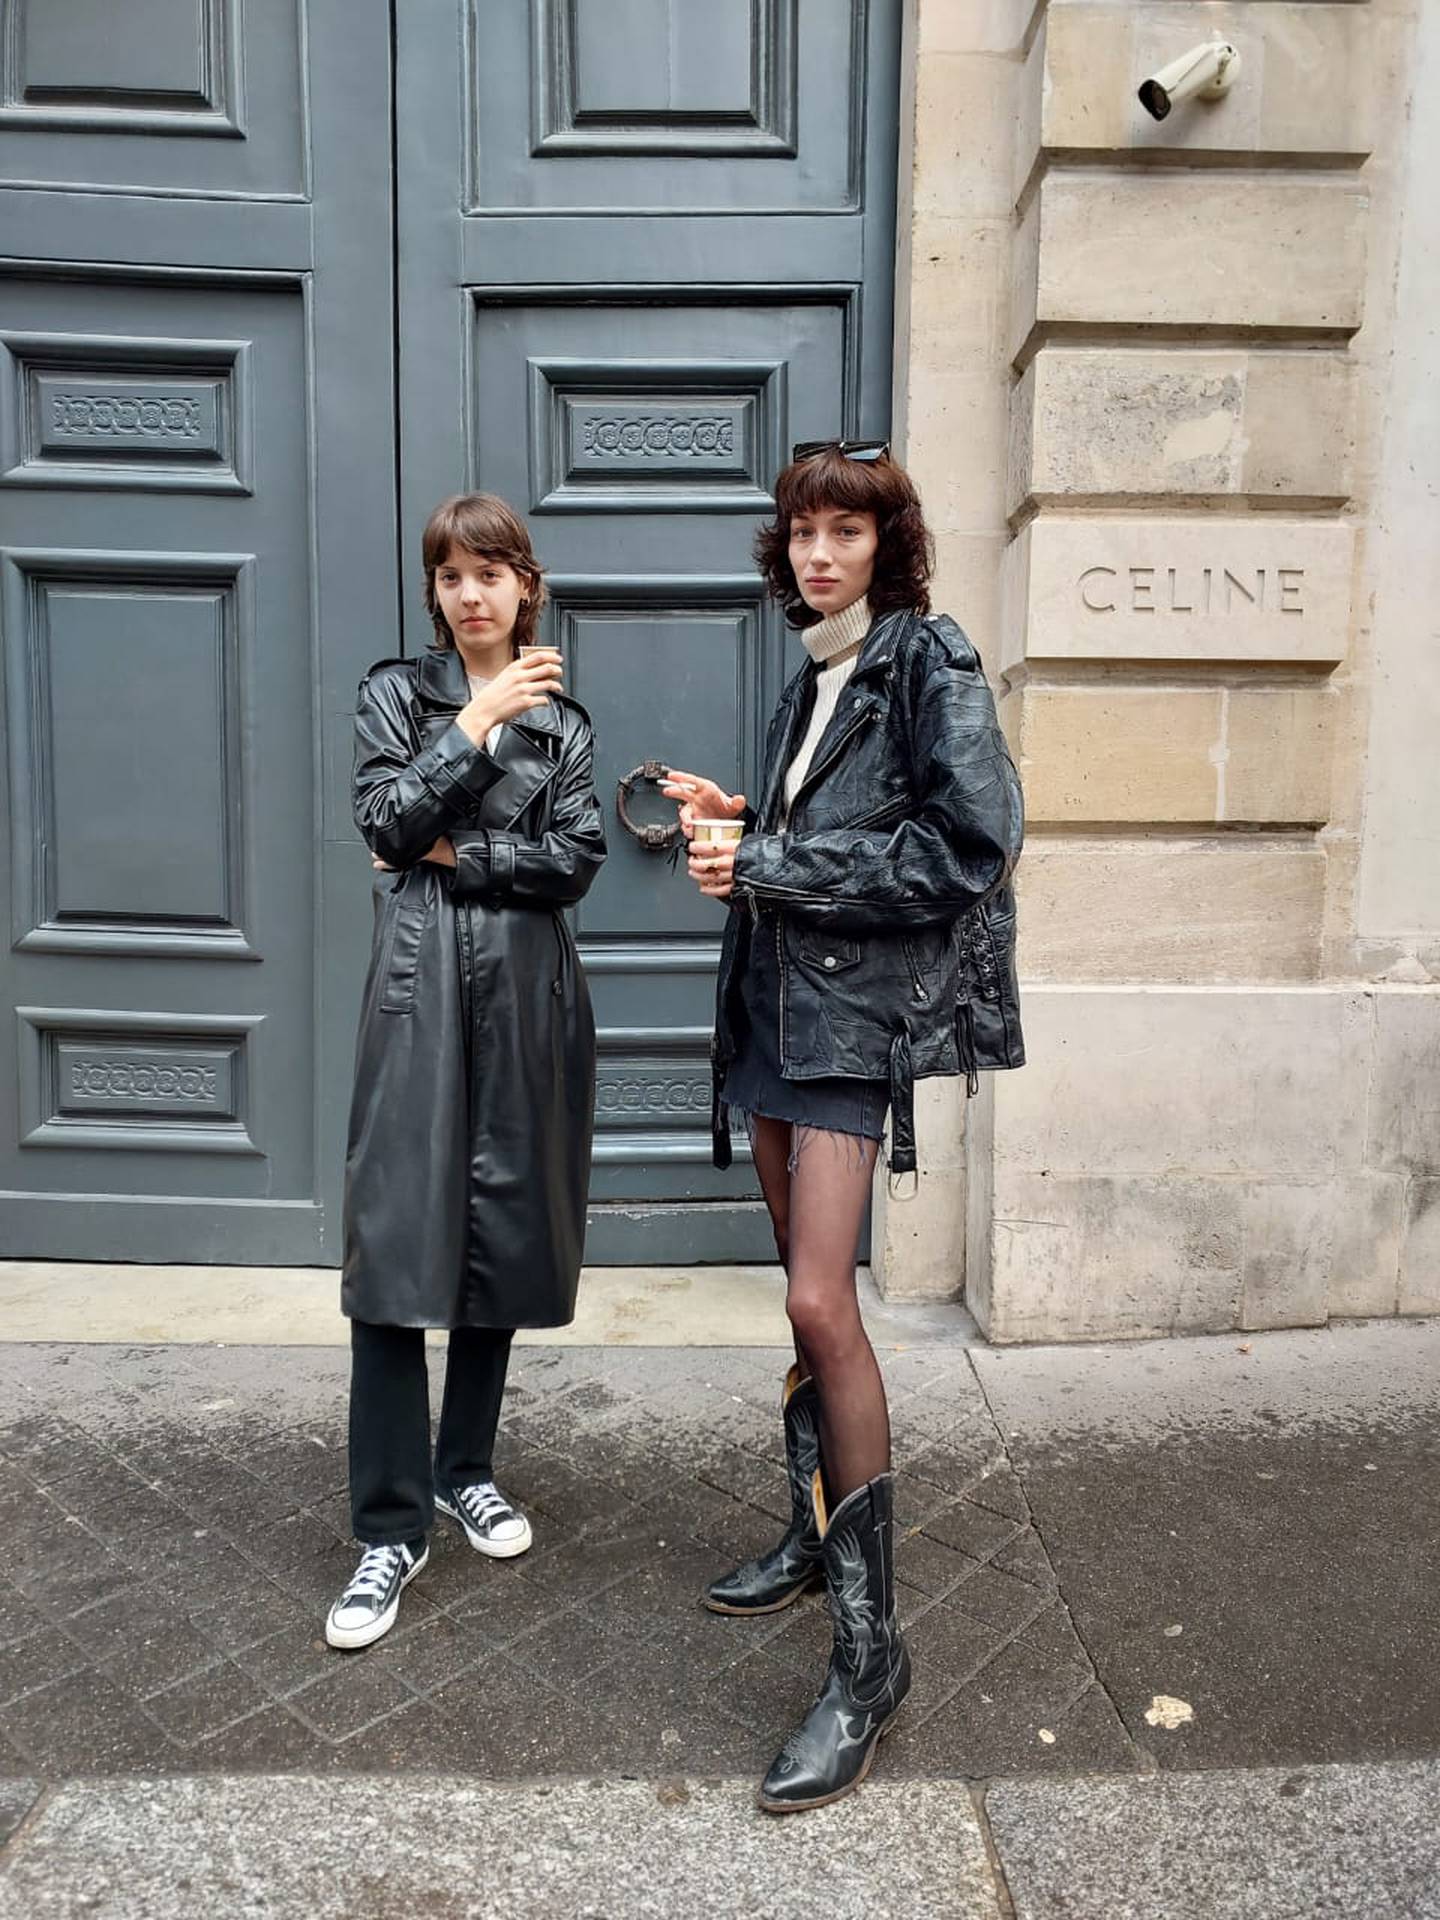 A duo of Parisian women spotted outside Celine. Sarah Maisey / The National